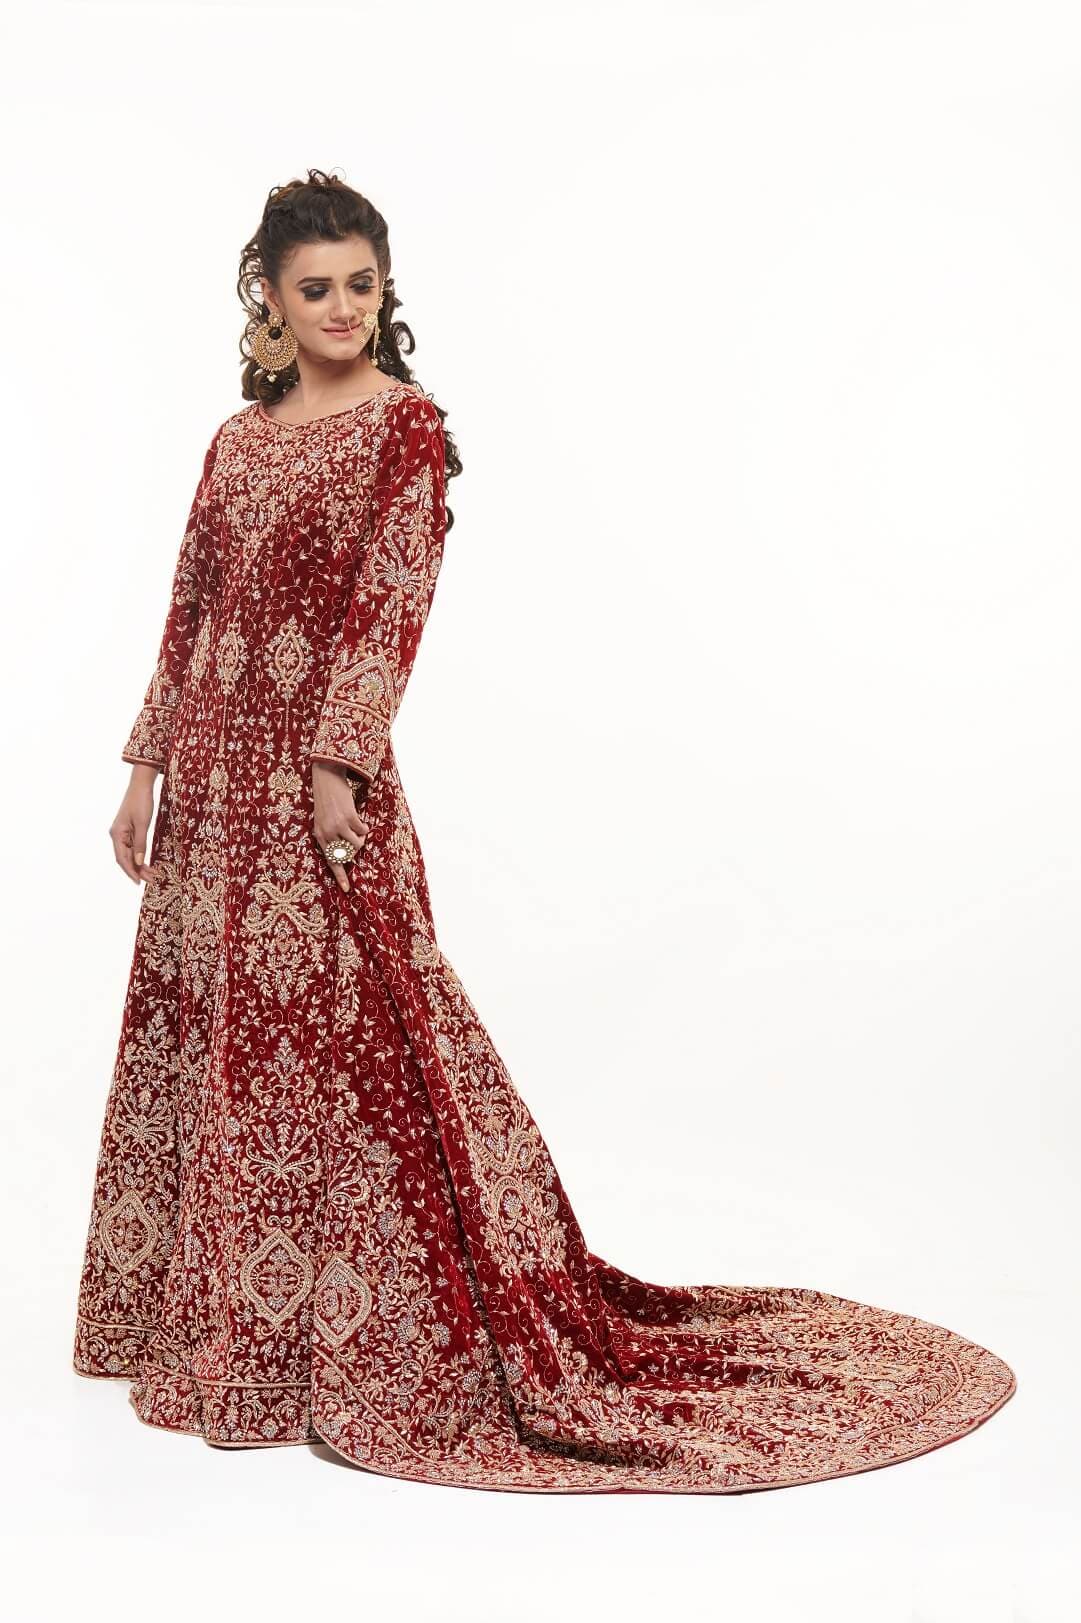 Maroon velvet gown with trail